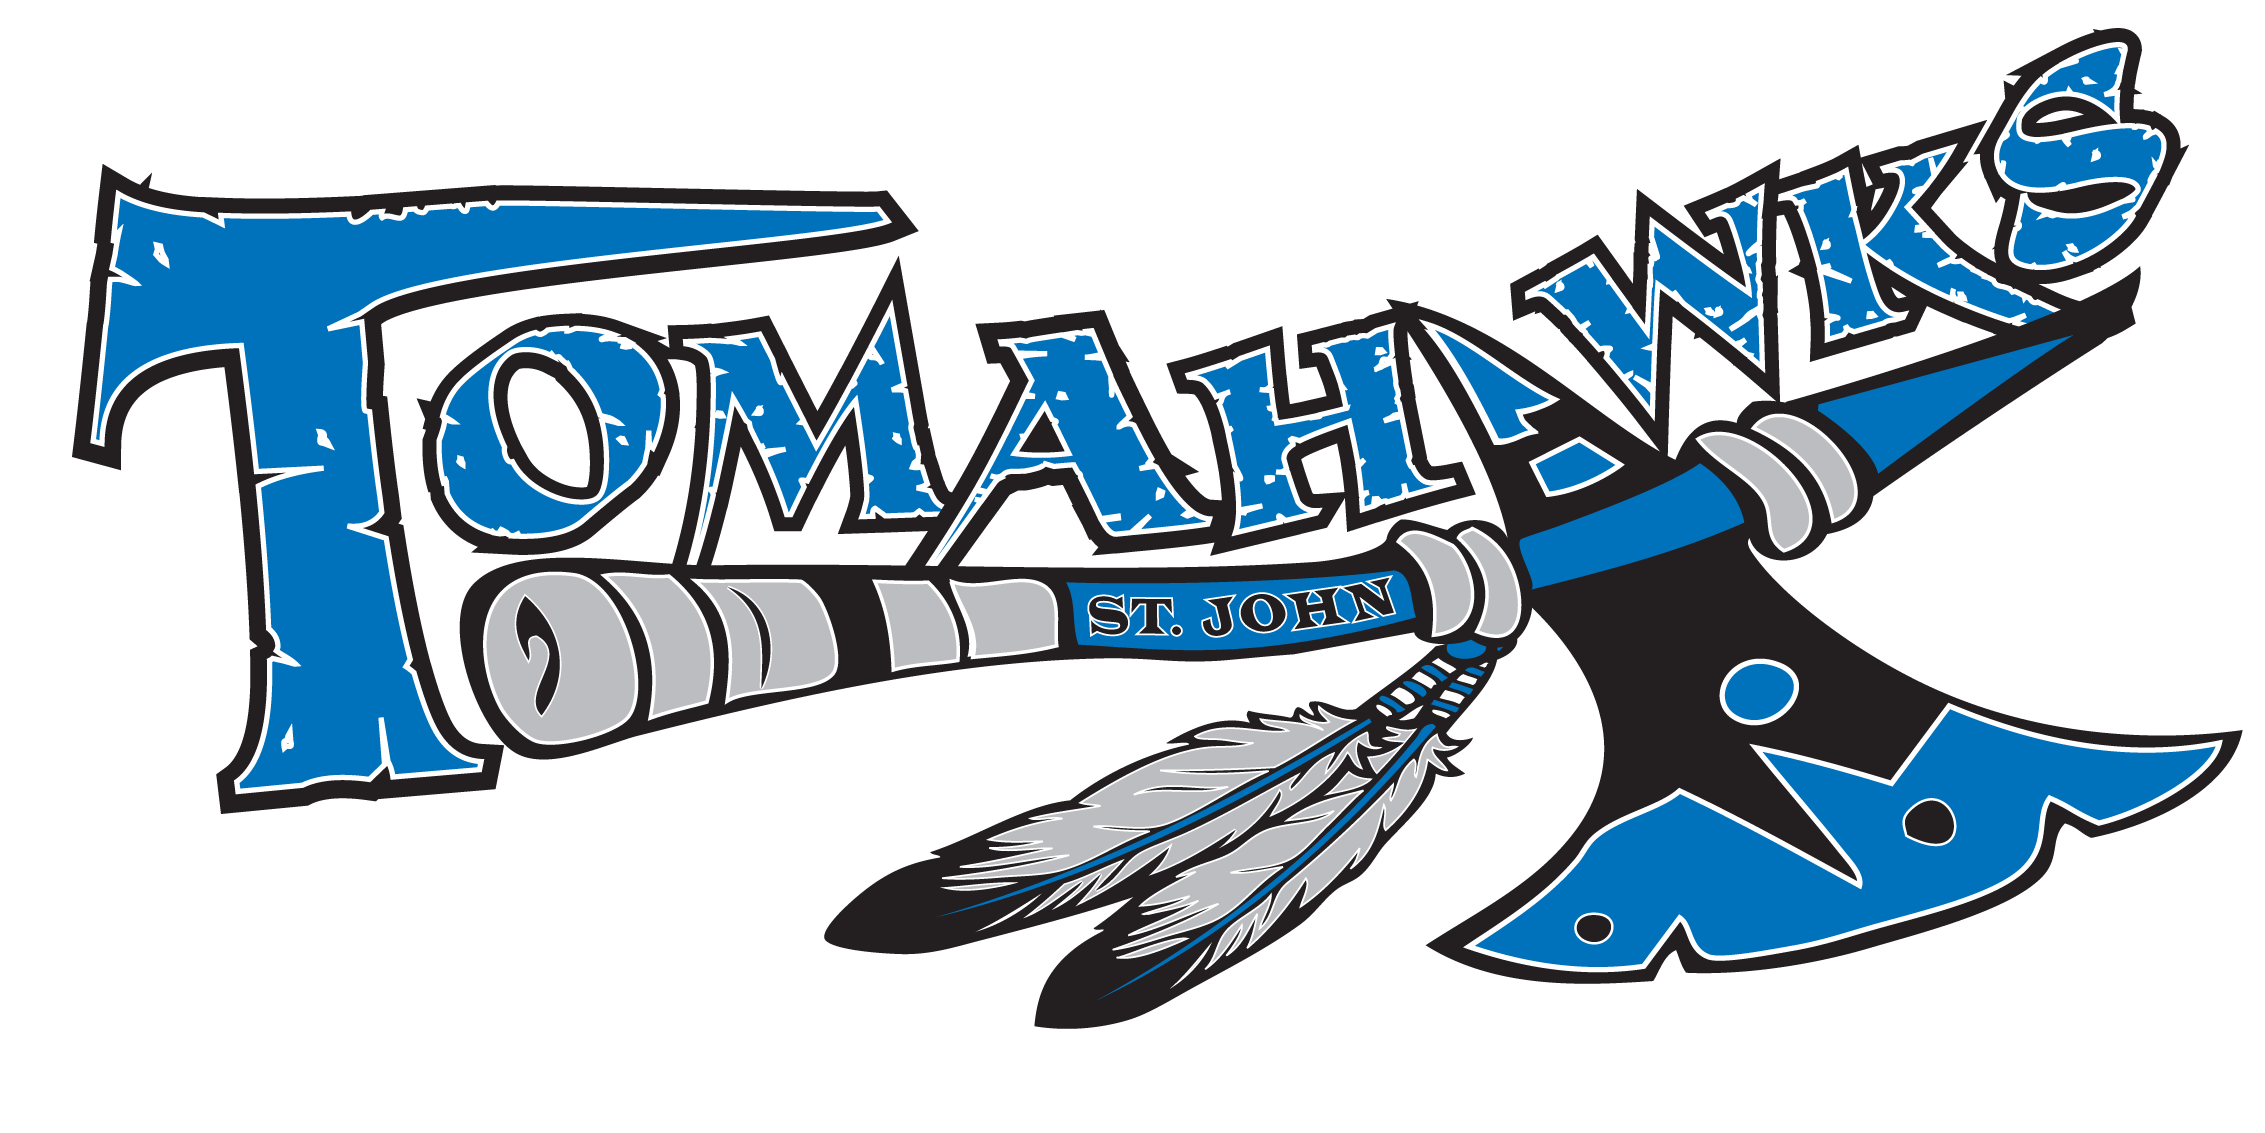 indian clipart tomahawk